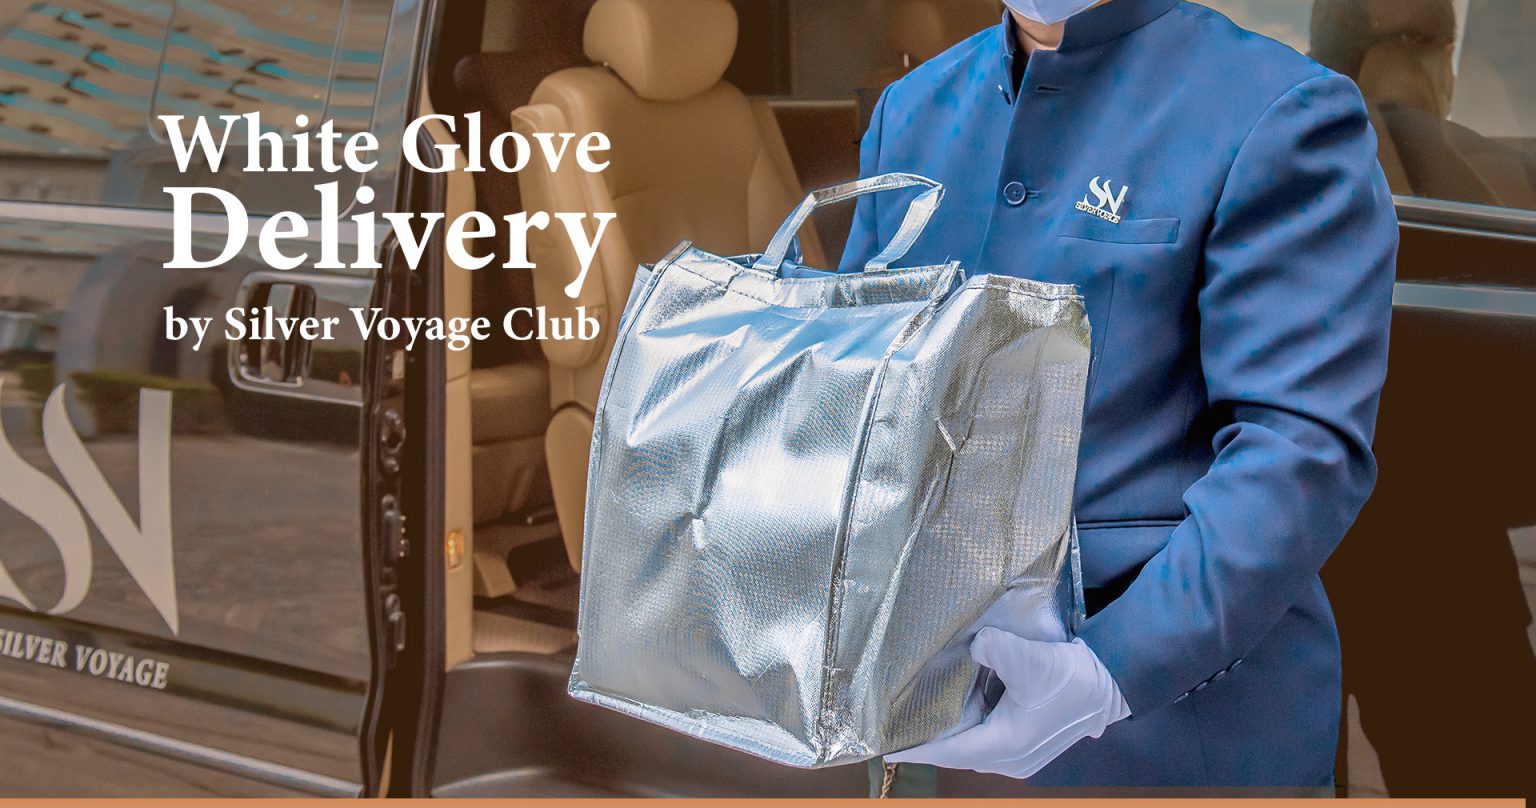 White Glove Delivery by Silver Voyage Club